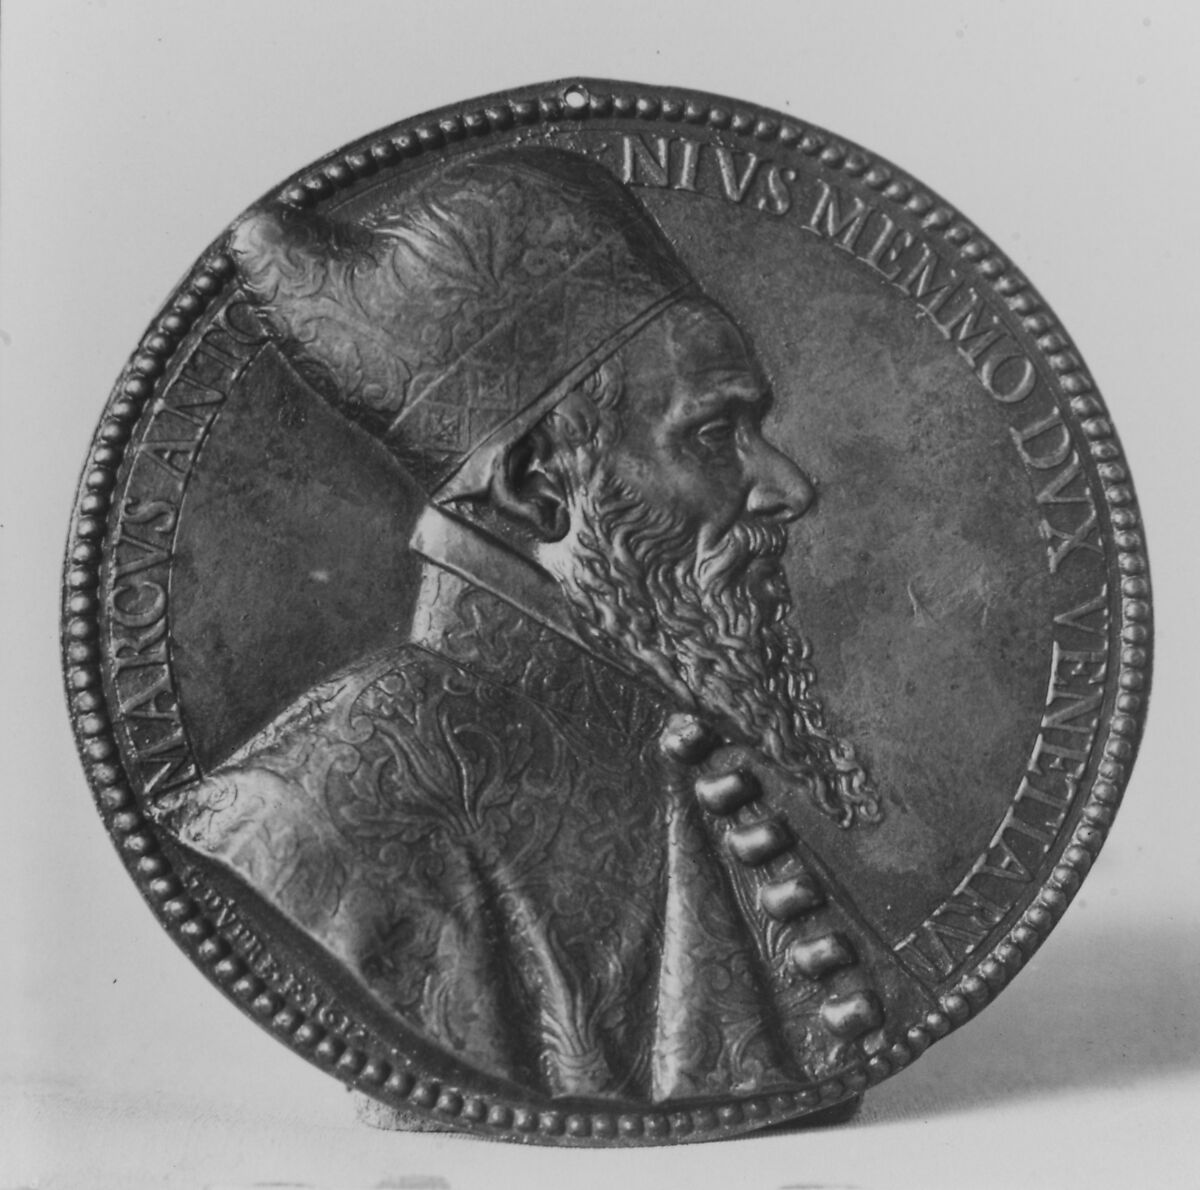 Marc Antonio Memmo, Doge of Venice (1546?–1615, doge 1612–15), Medalist: Guillaume Dupré (French, 1579–1640), Bronze, French 